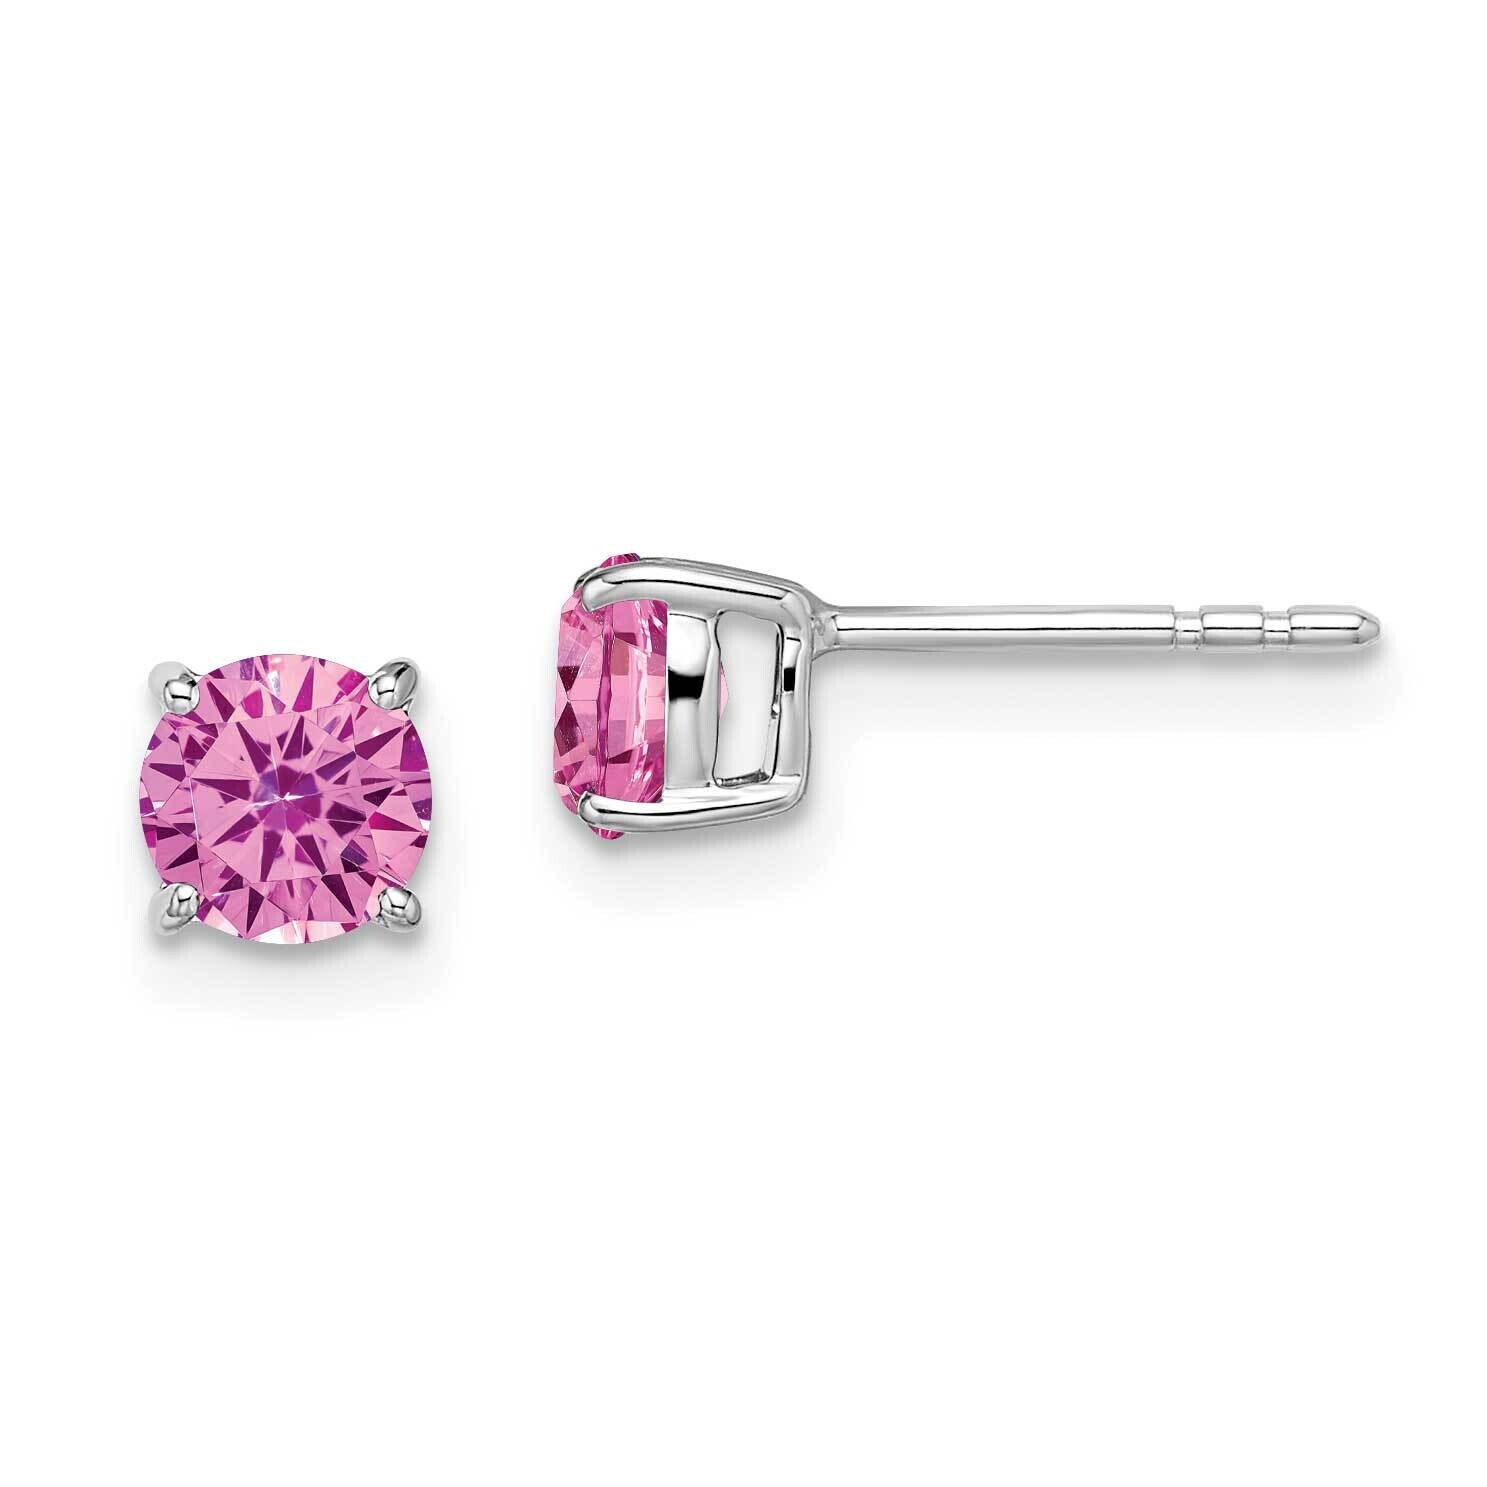 Round Created Pink Sapphire Earrings 14k White Gold EM7097-CPS-W